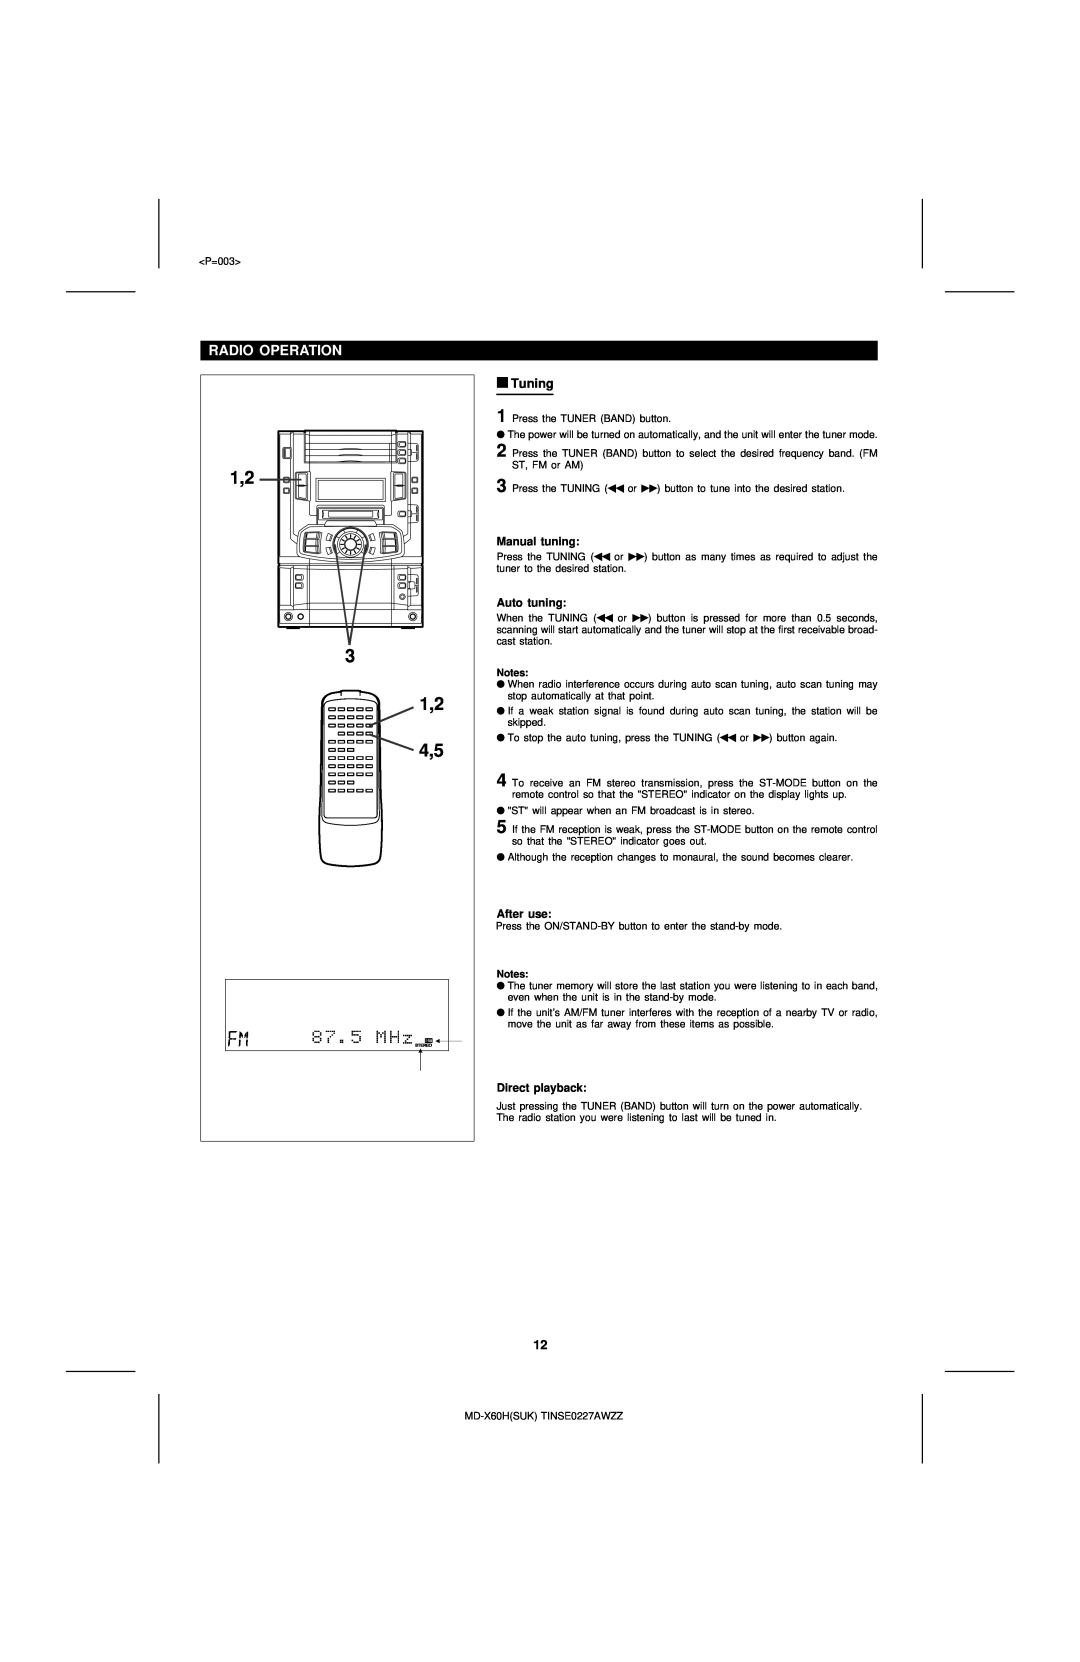 Sharp MD-X60H operation manual Radio Operation, Tuning, Manual tuning, Auto tuning, After use, Direct playback 